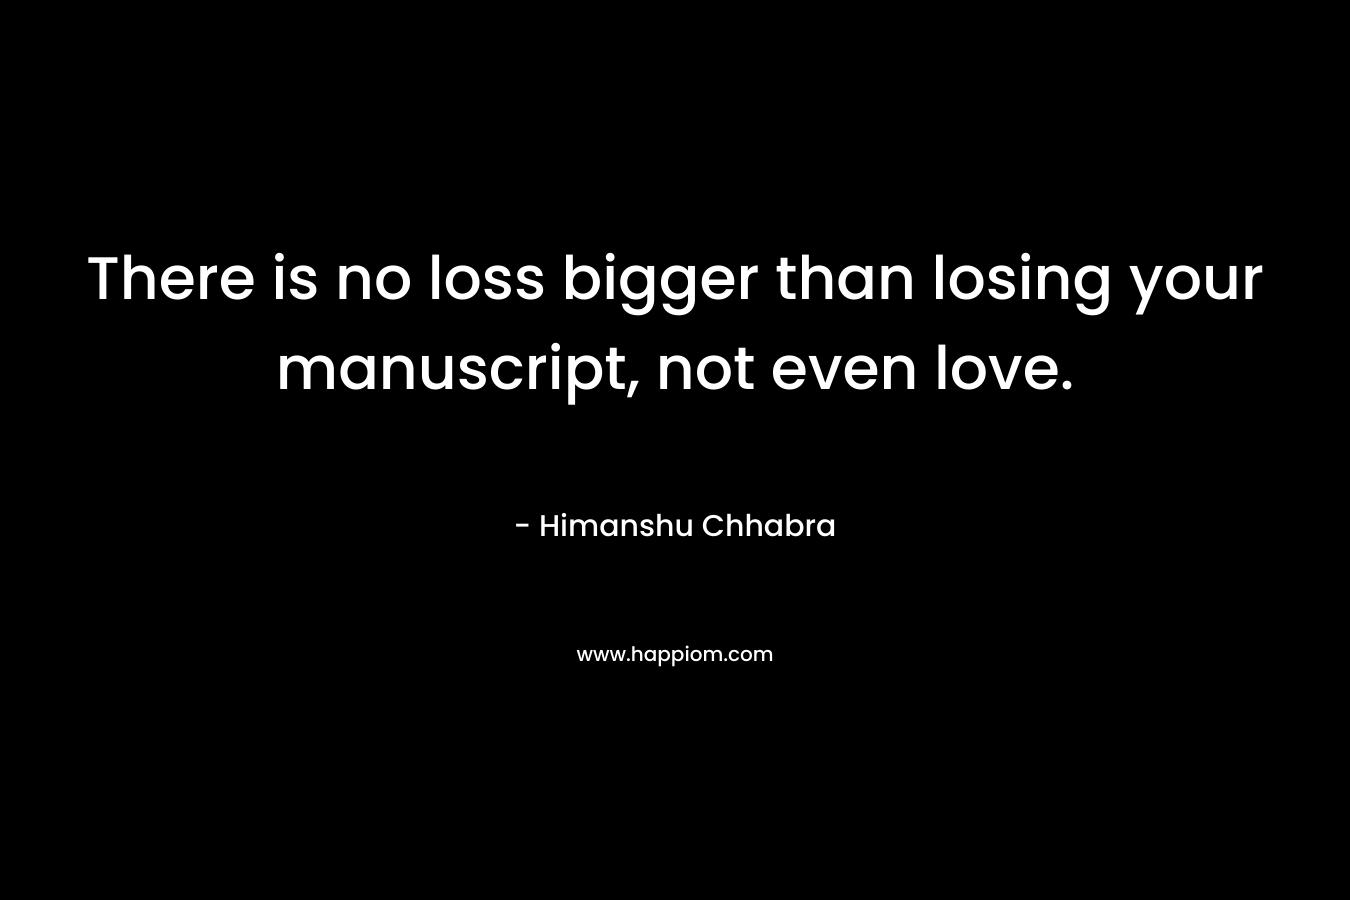 There is no loss bigger than losing your manuscript, not even love.